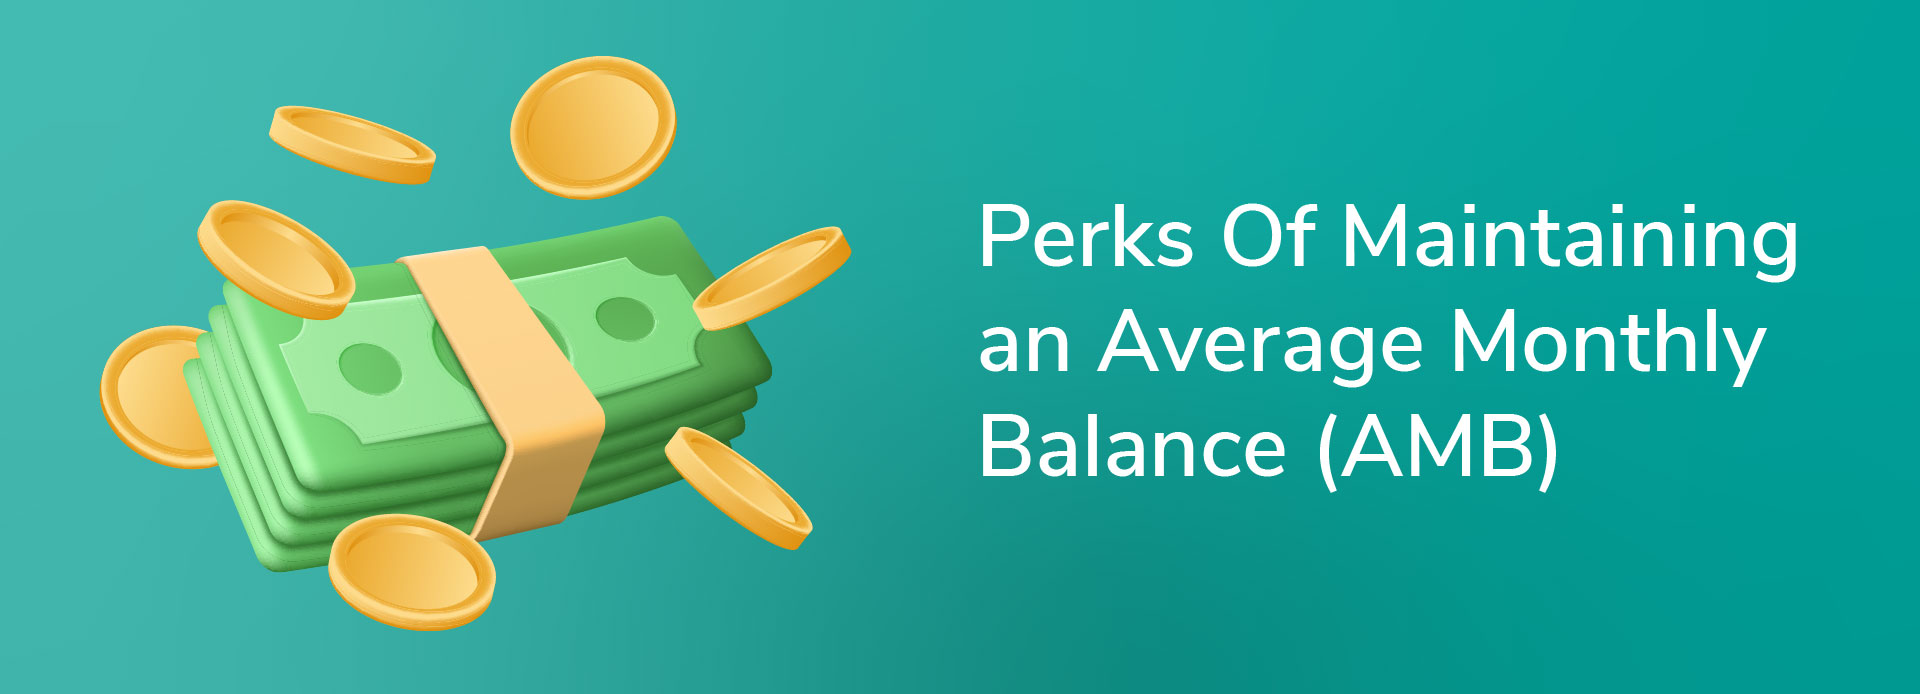 Perks Of Maintaining an Average Monthly Balance (AMB)